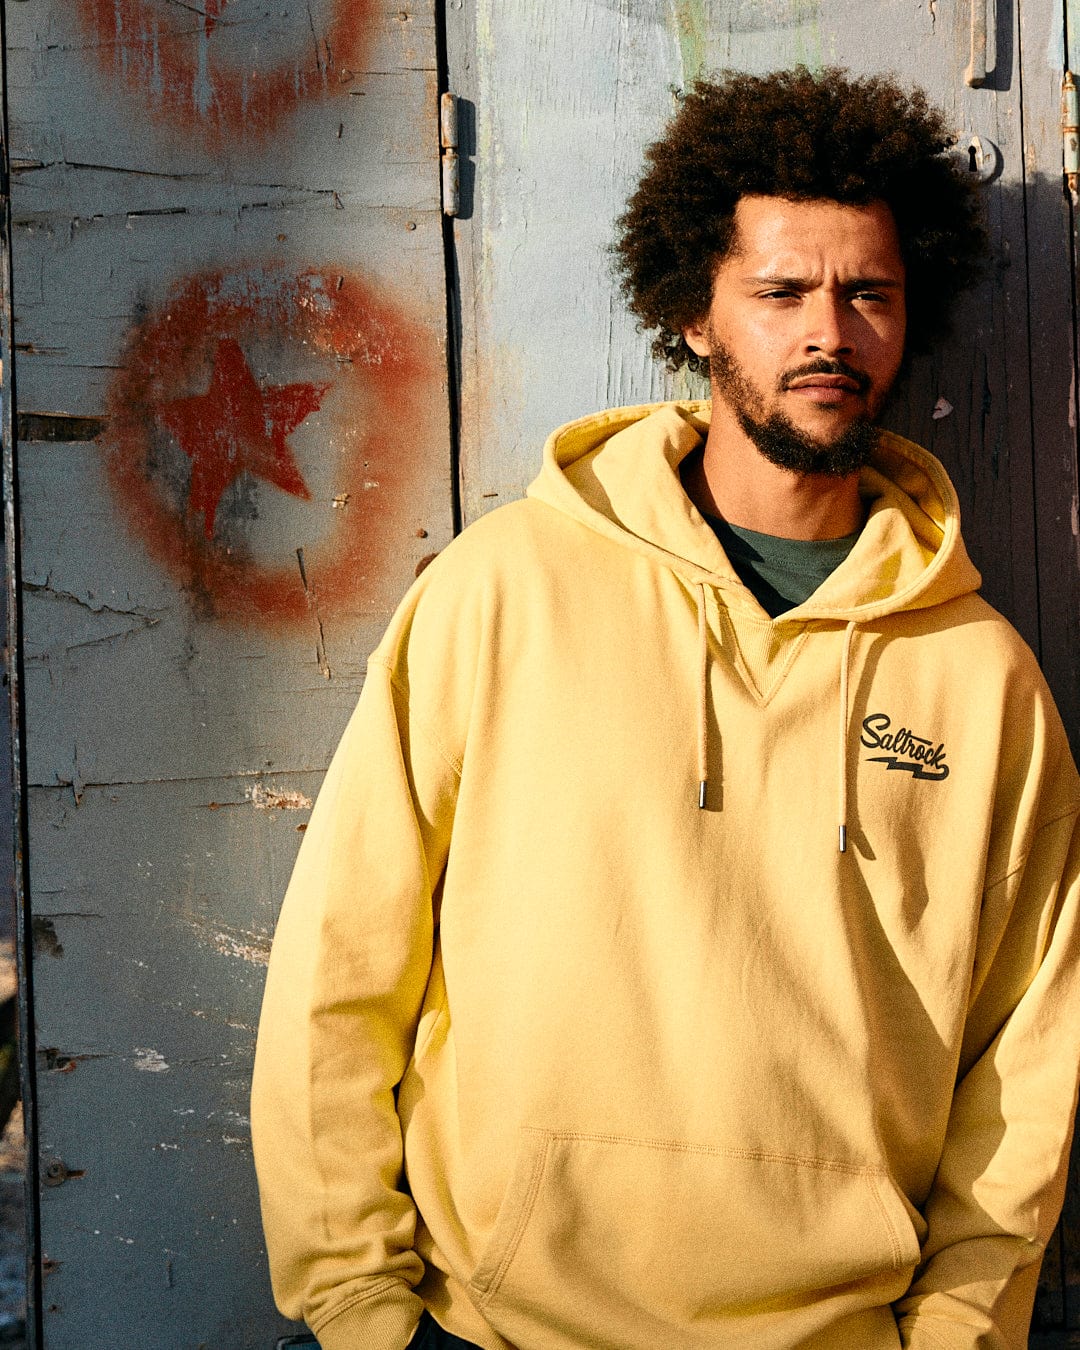 Man with curly hair standing by a weathered door with a red star graffiti, wearing a yellow Saltrock Gas Station - Recycled Mens Pop Hoodie.